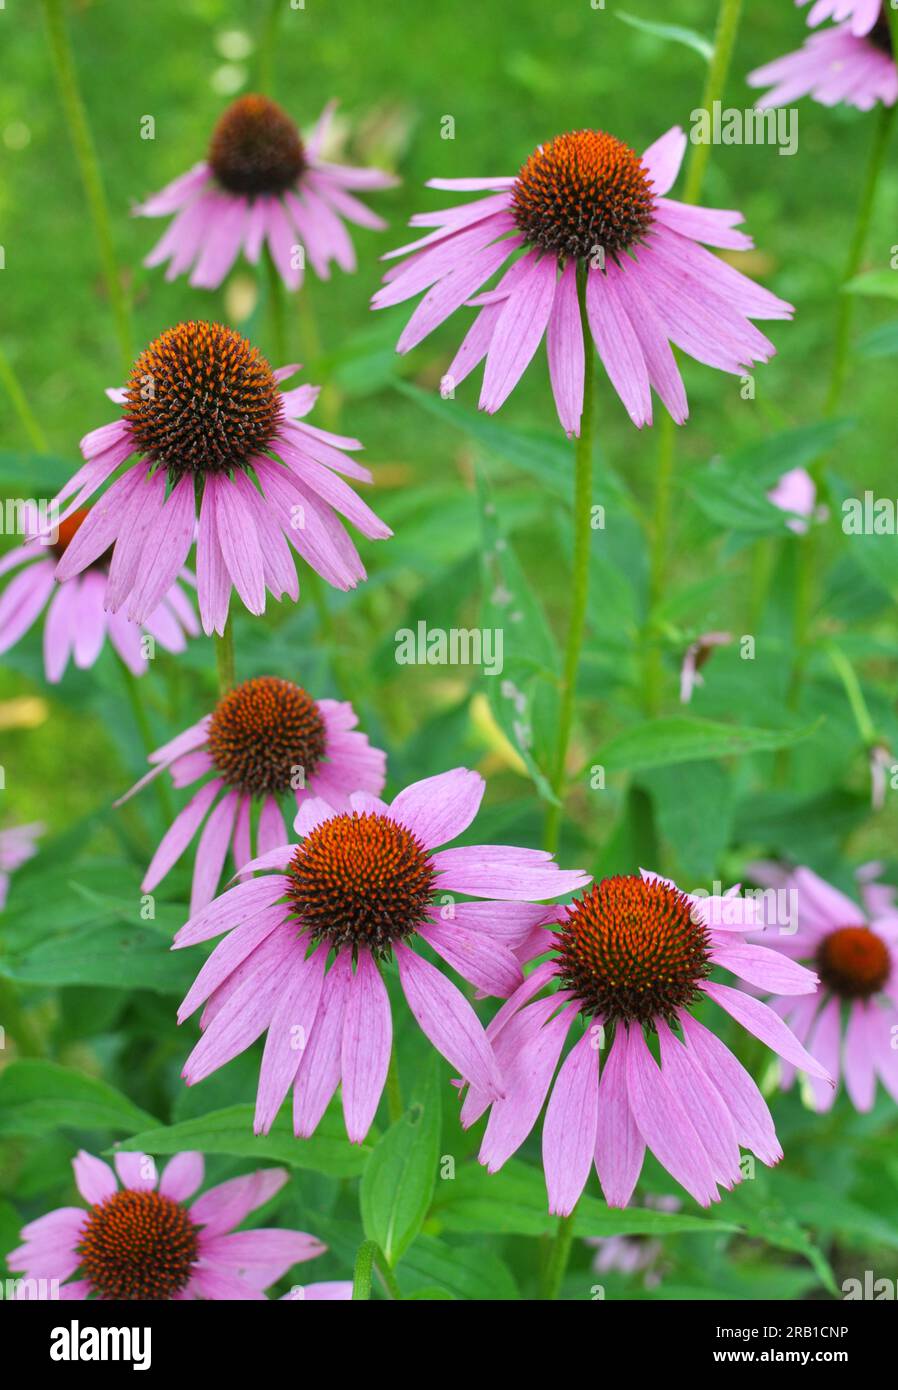 Bloom in nature perennial plant from the family of aster echinacea purpurea Stock Photo